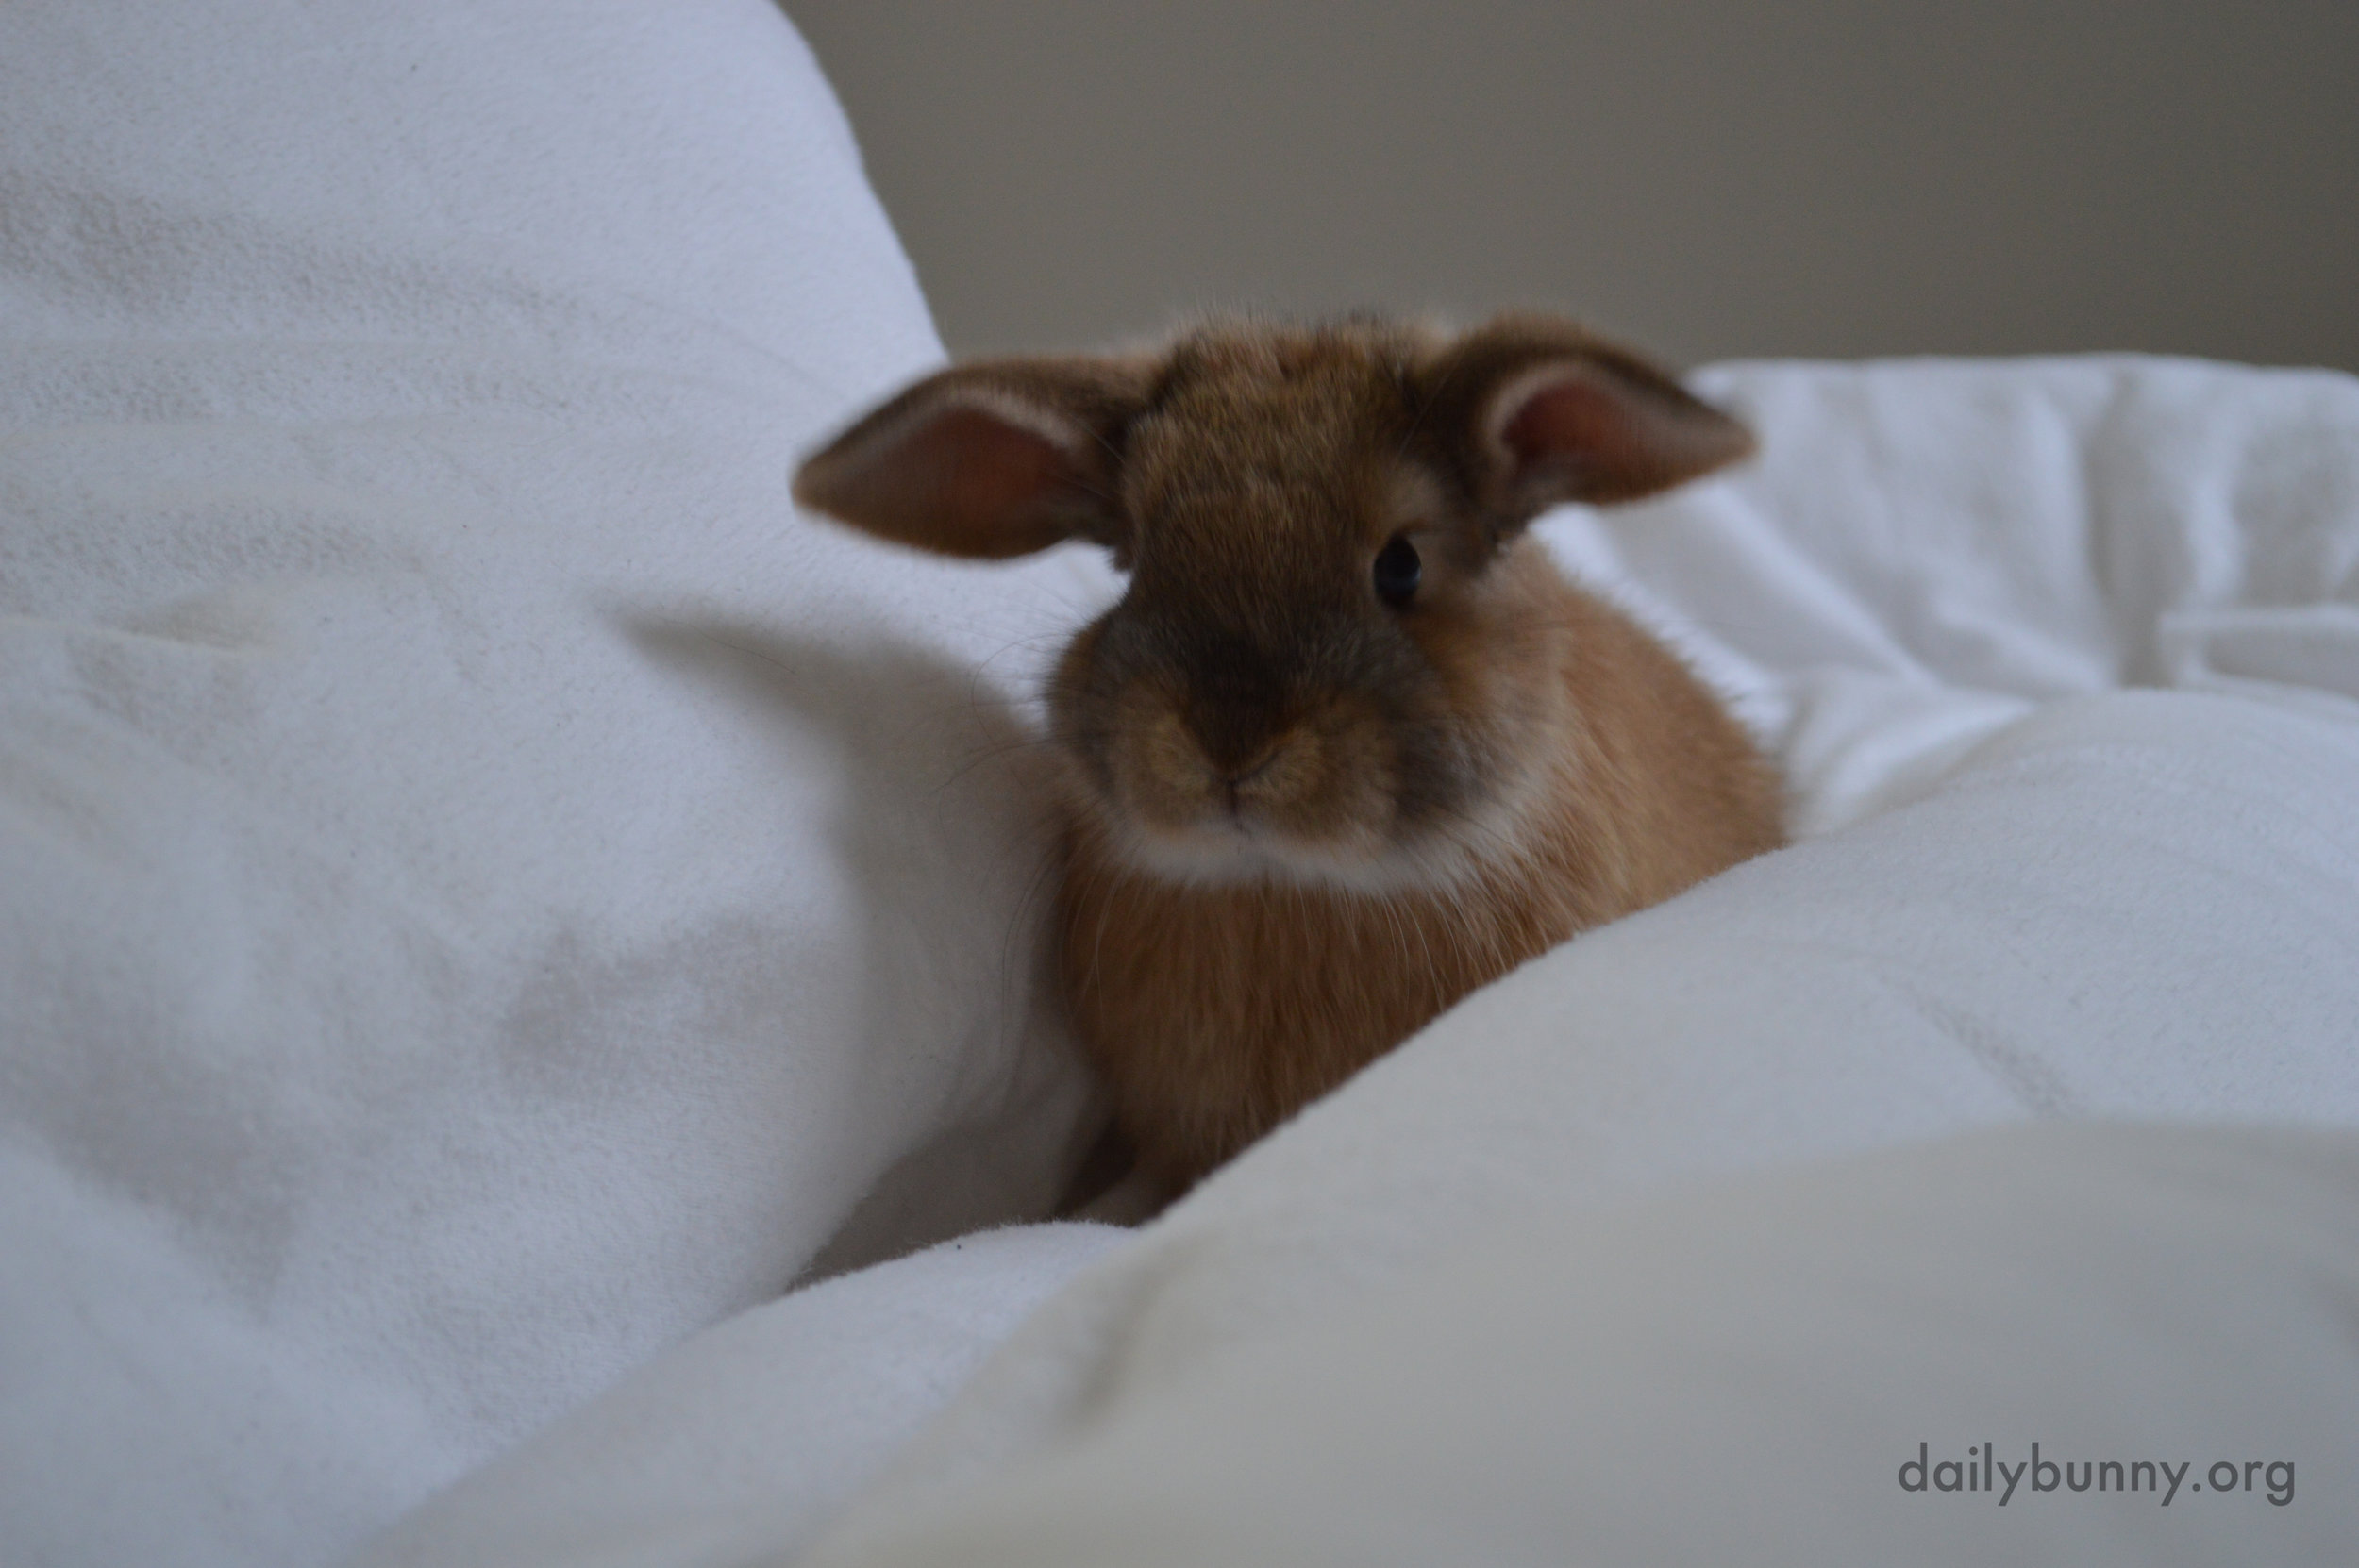 Bunny Explores the Hilly Fluffiness of the Duvet 2